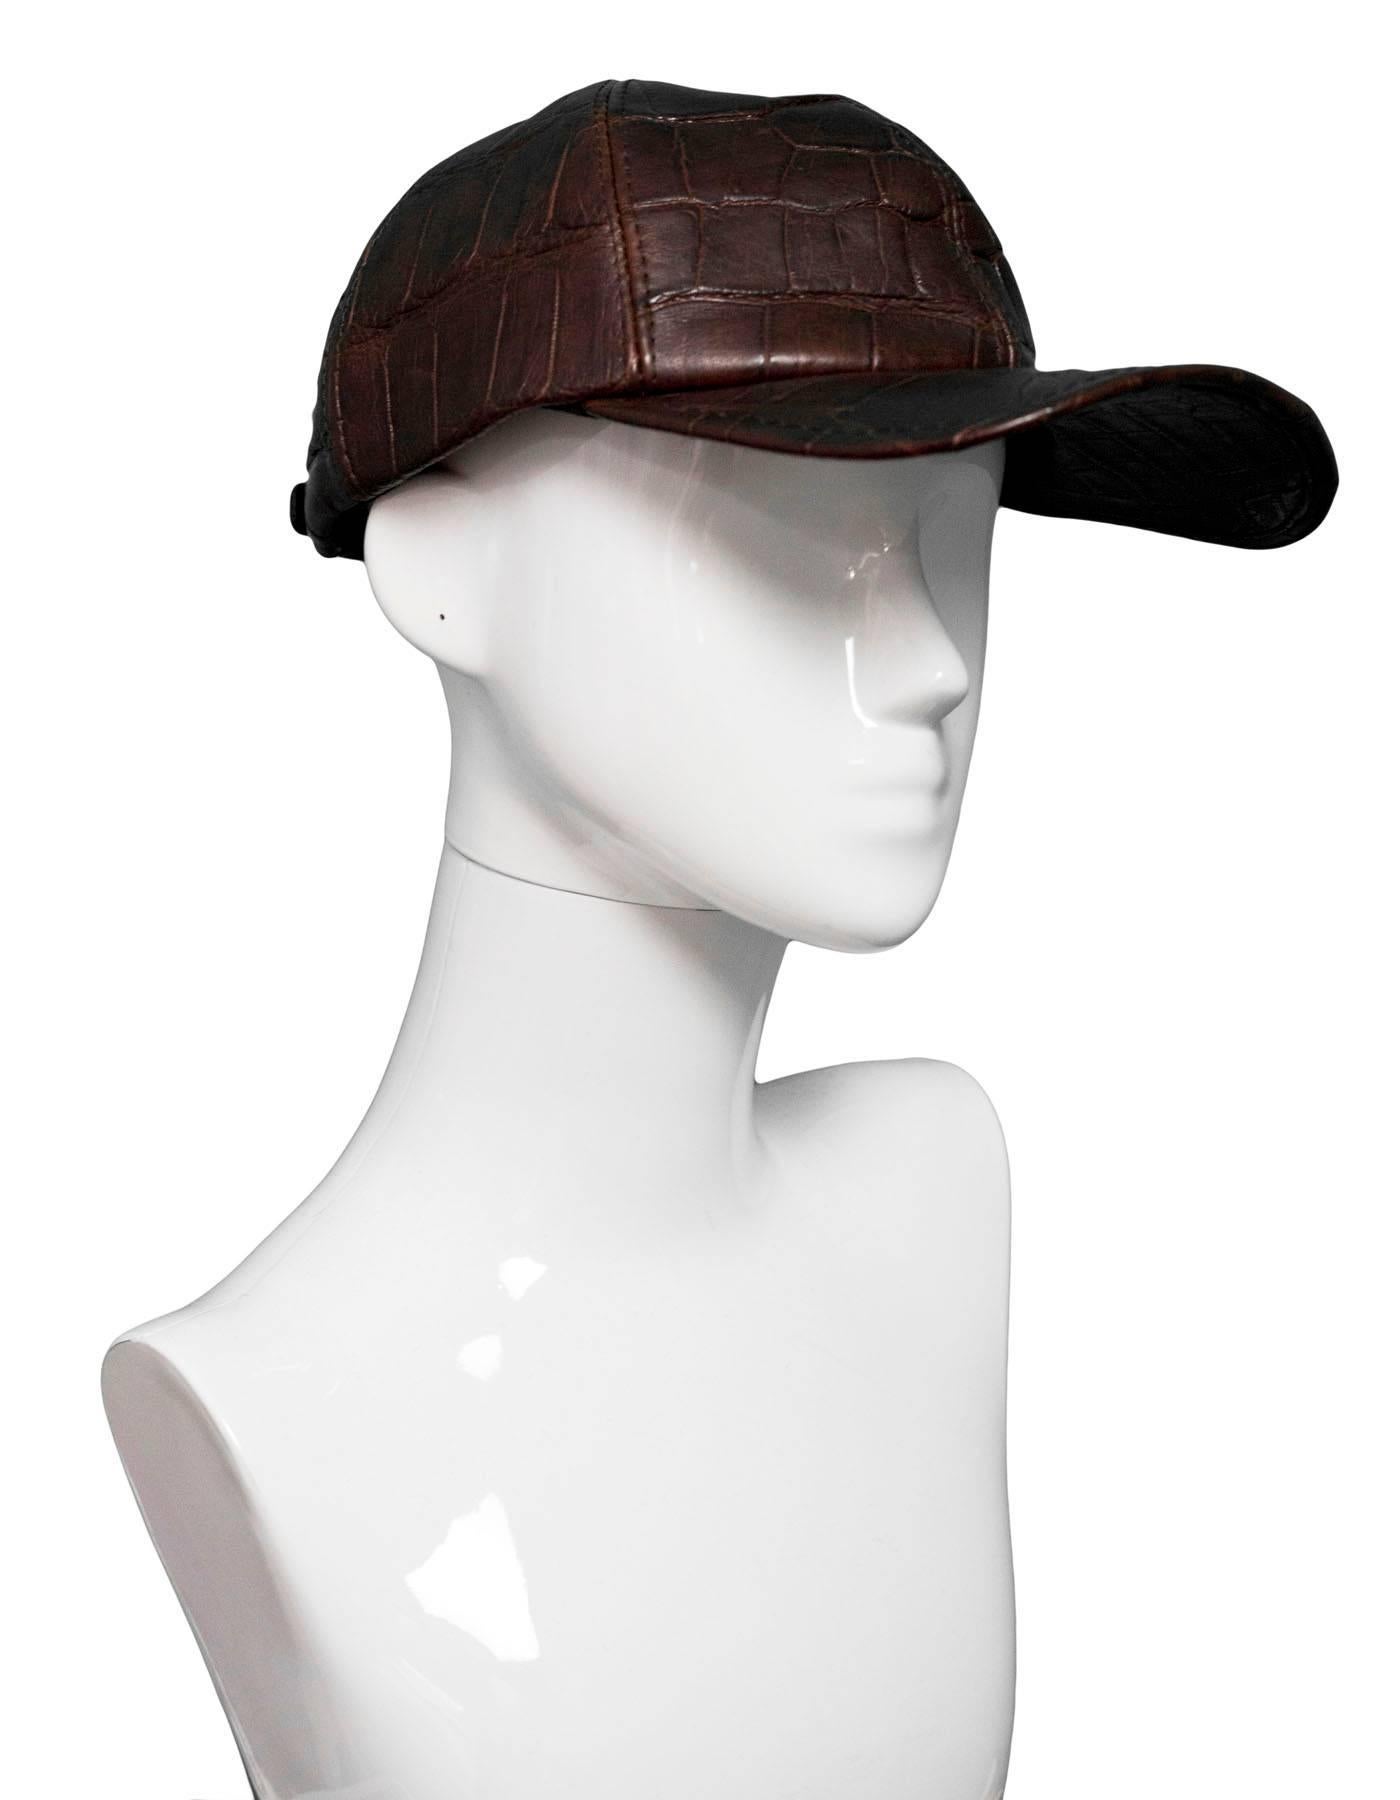 Brown Crocodile Baseball Cap

Color: Brown
Materials: Crocodile
Overall Condition: Excellent pre-owned condition with the exception of some wear and darkening along trim and edges, some wear at interior lining  and headband

Measurements:
Inside